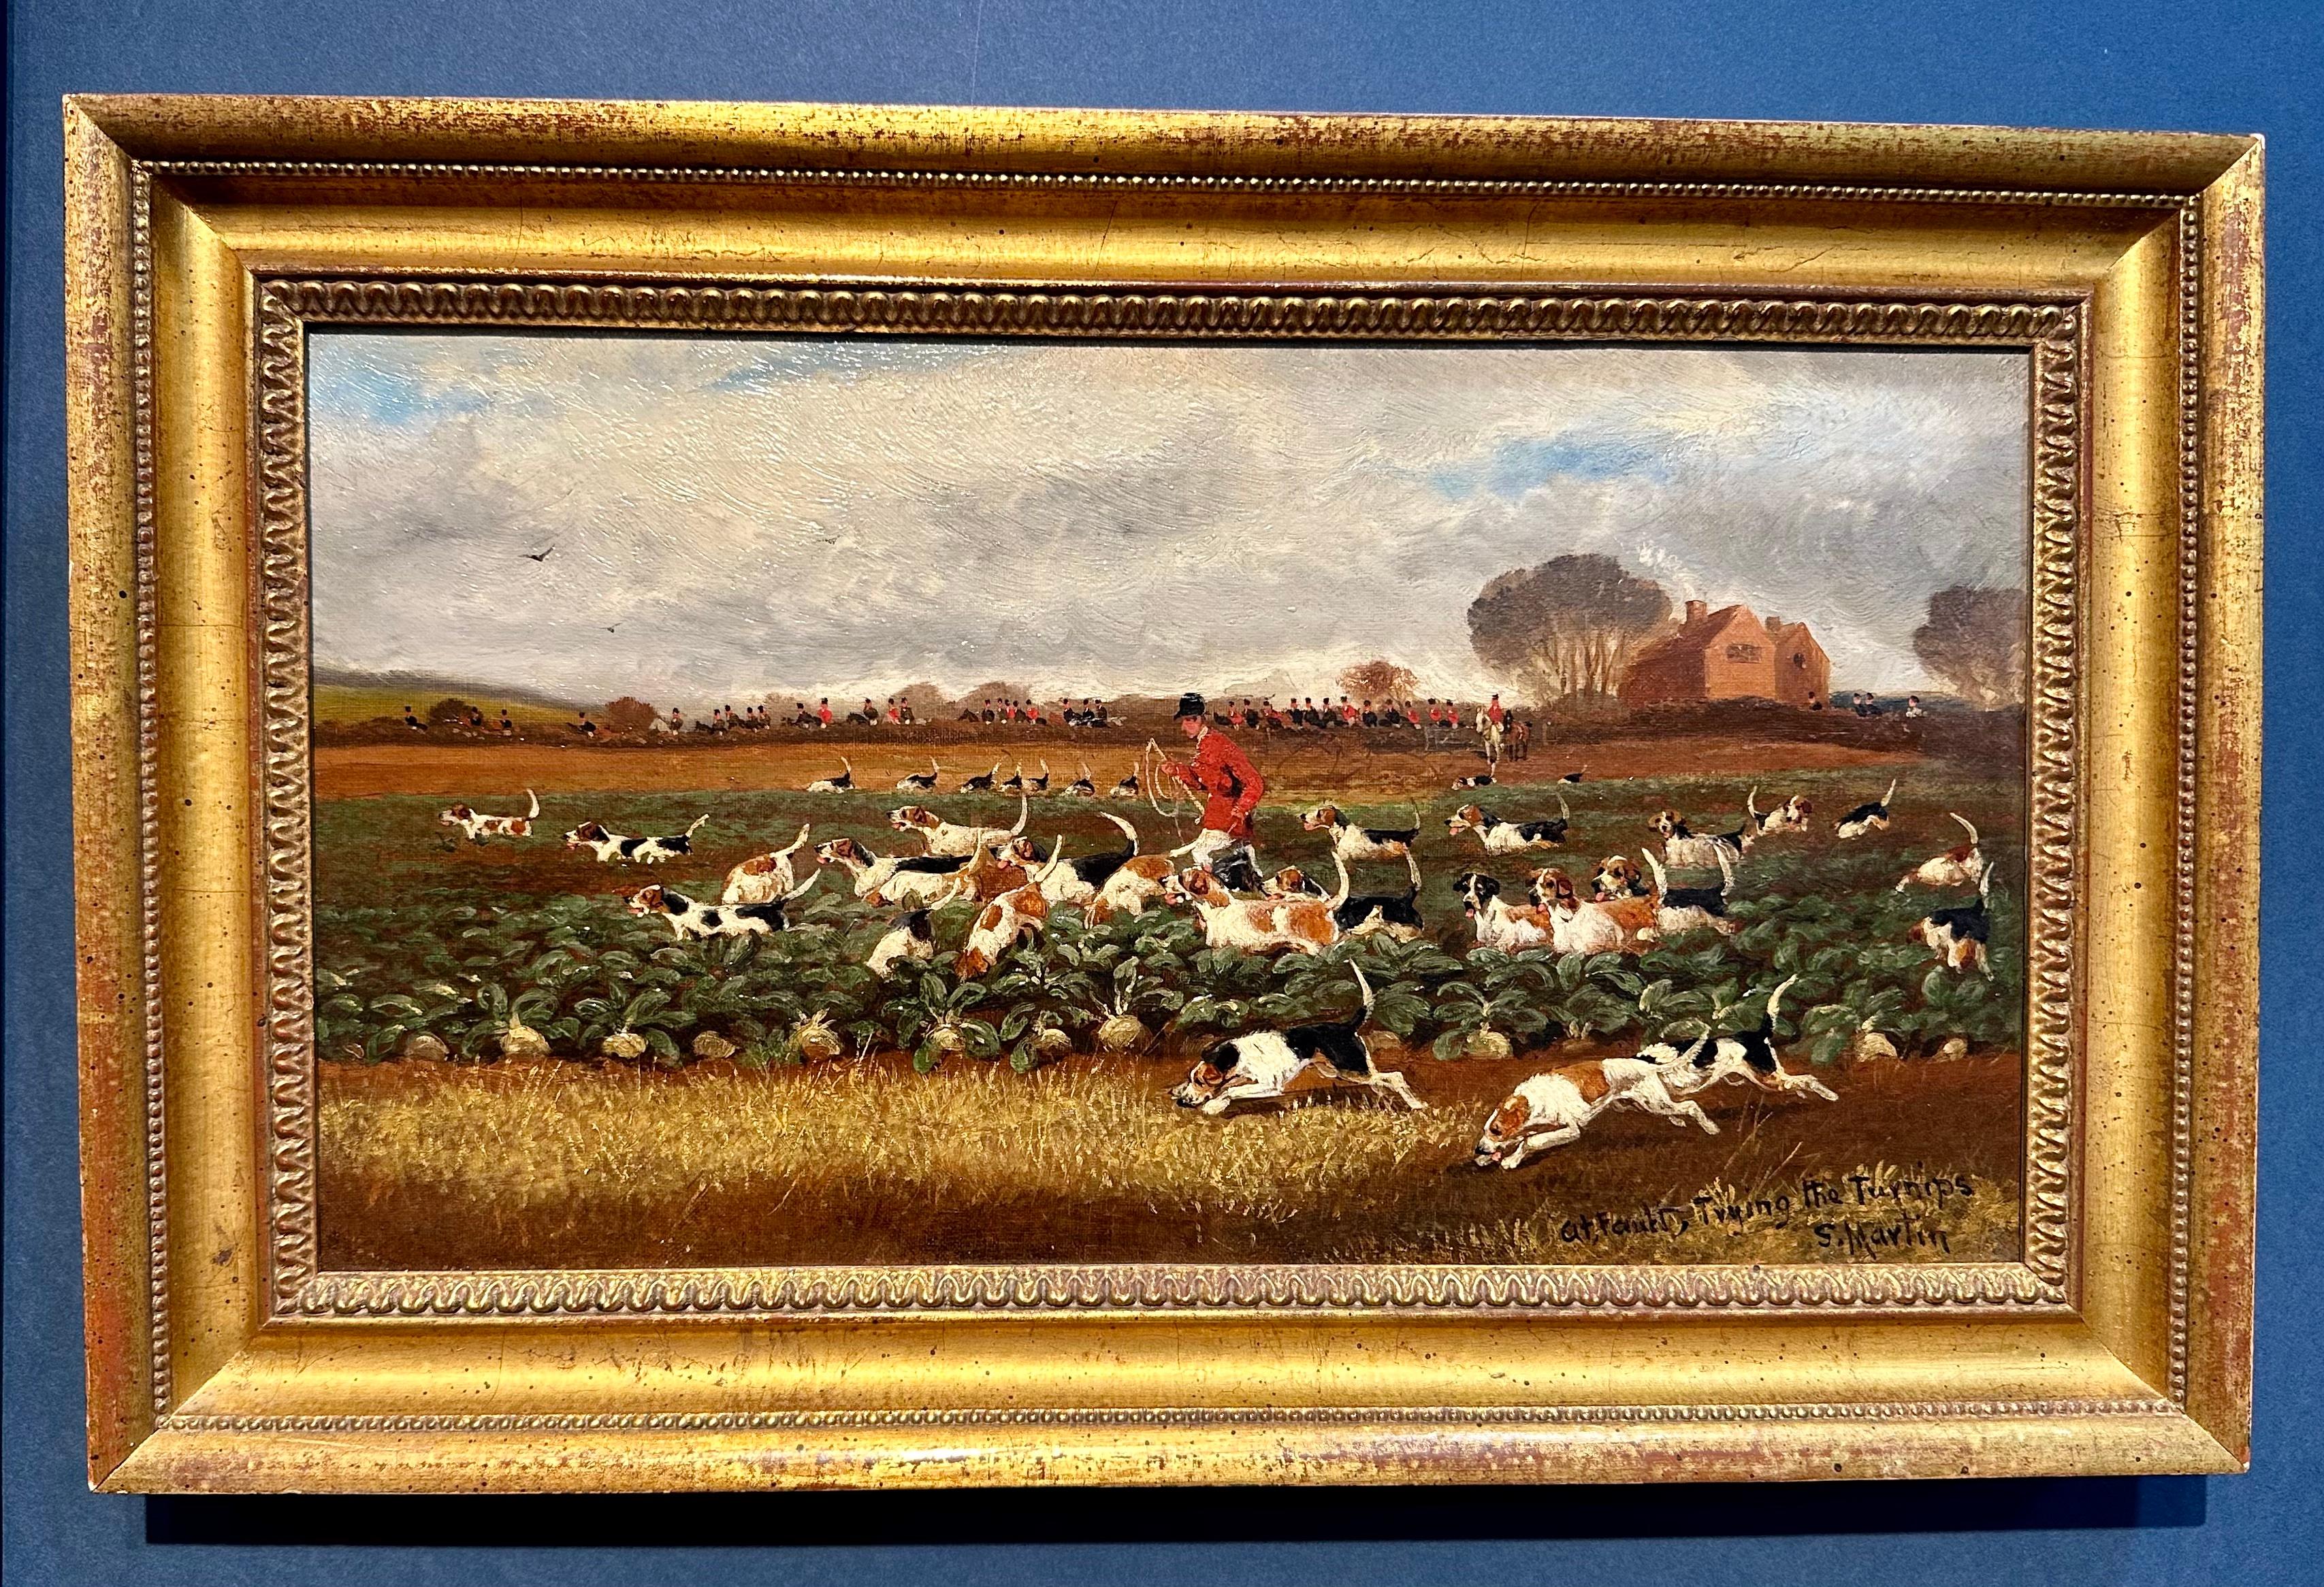 Sylvester Martin Figurative Painting - 19th century English Fox hunters with hounds in a turnip patch landscape.